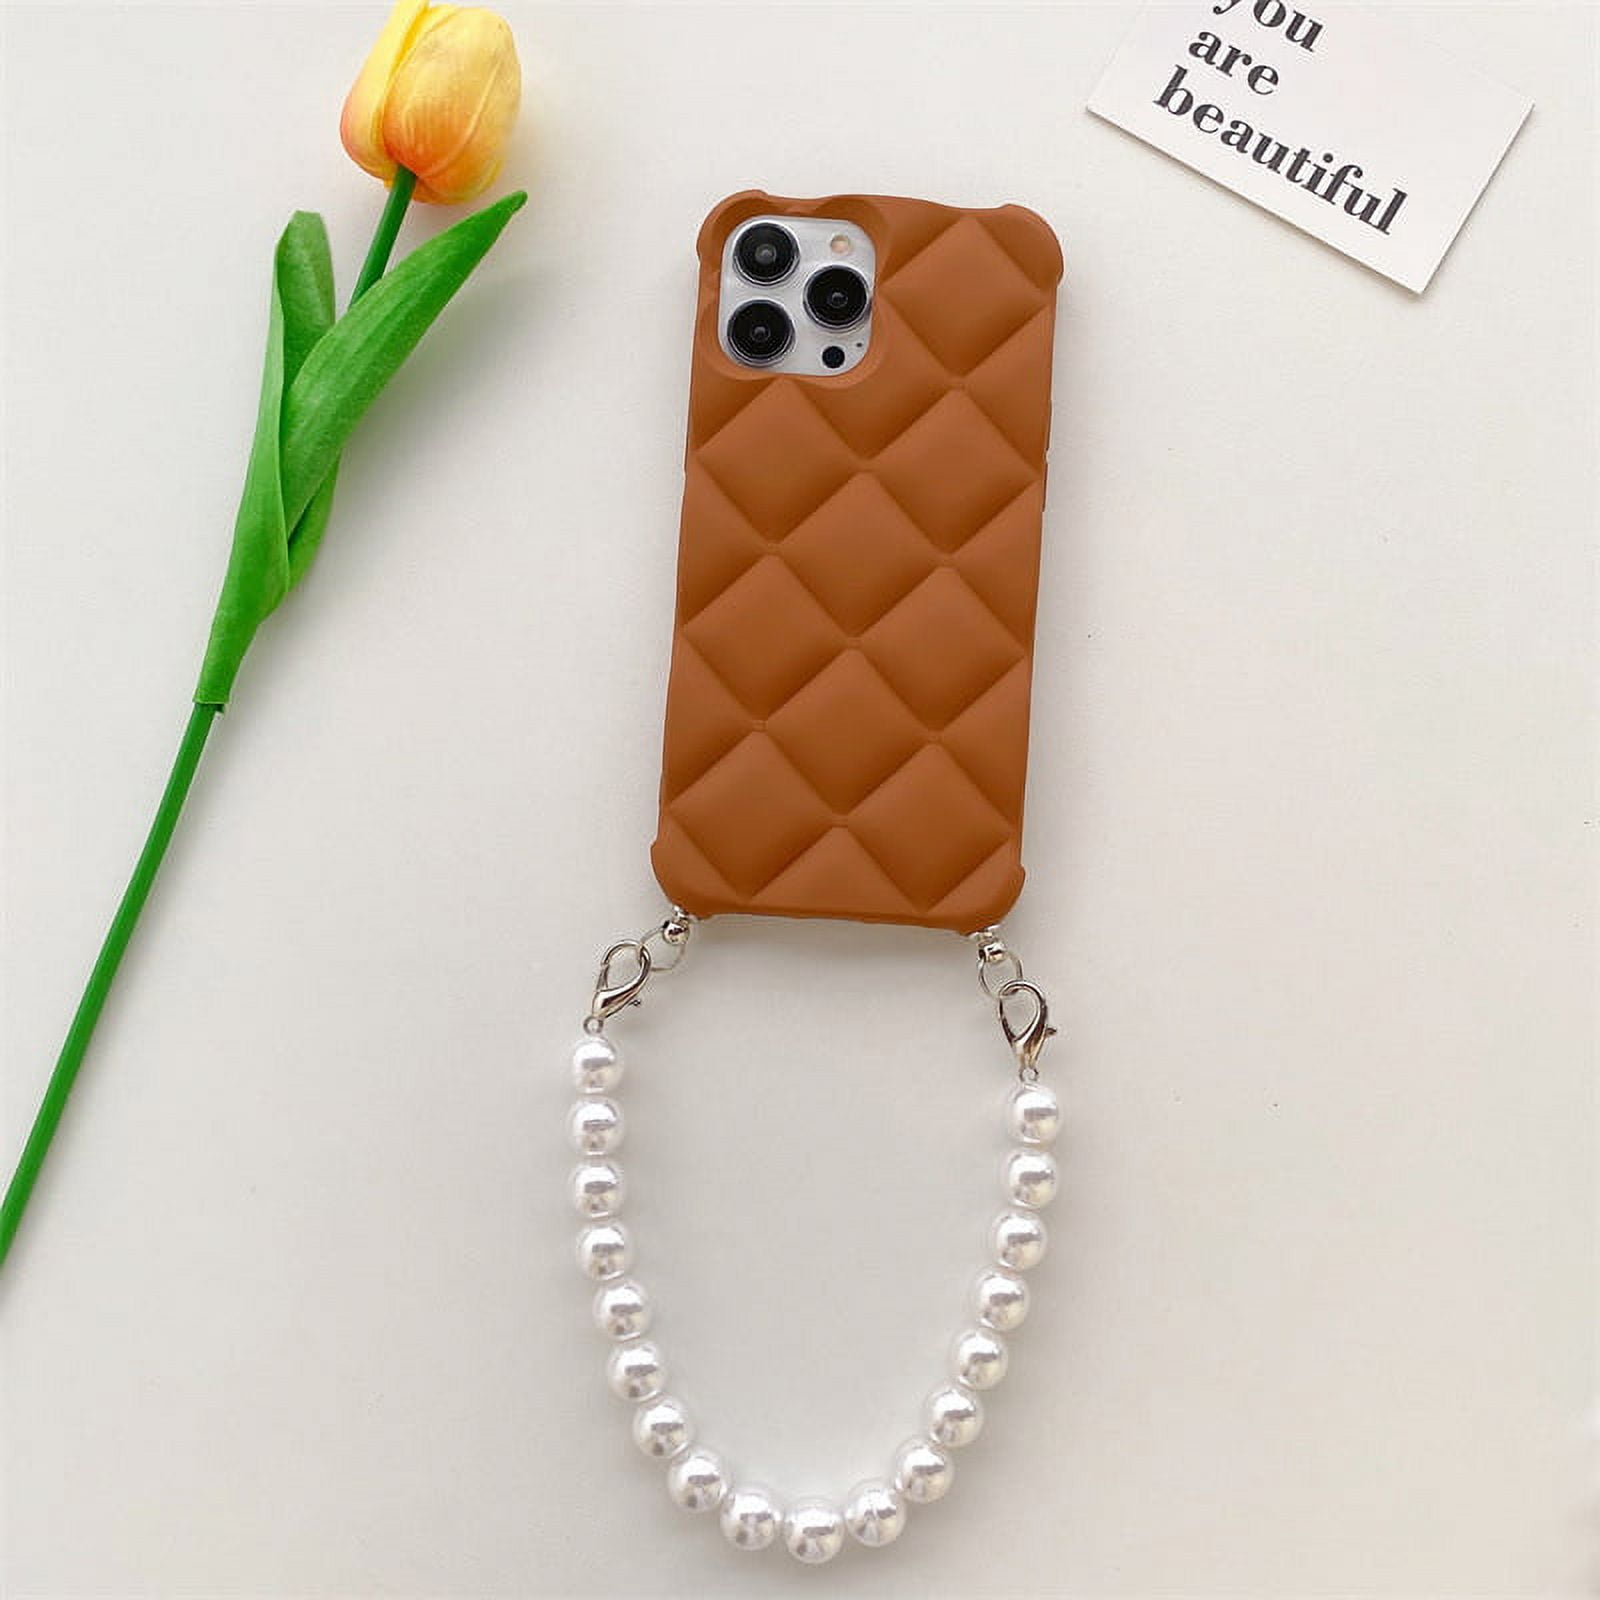  Omio for iPhone XS Max Handbag Case with Card Holder Wrist  Lanyard Strap Soft Silicone Cover for iPhone XS Max Wallet Case for Women  Luxury Stylish Long Pearl Crossbody Chain Case